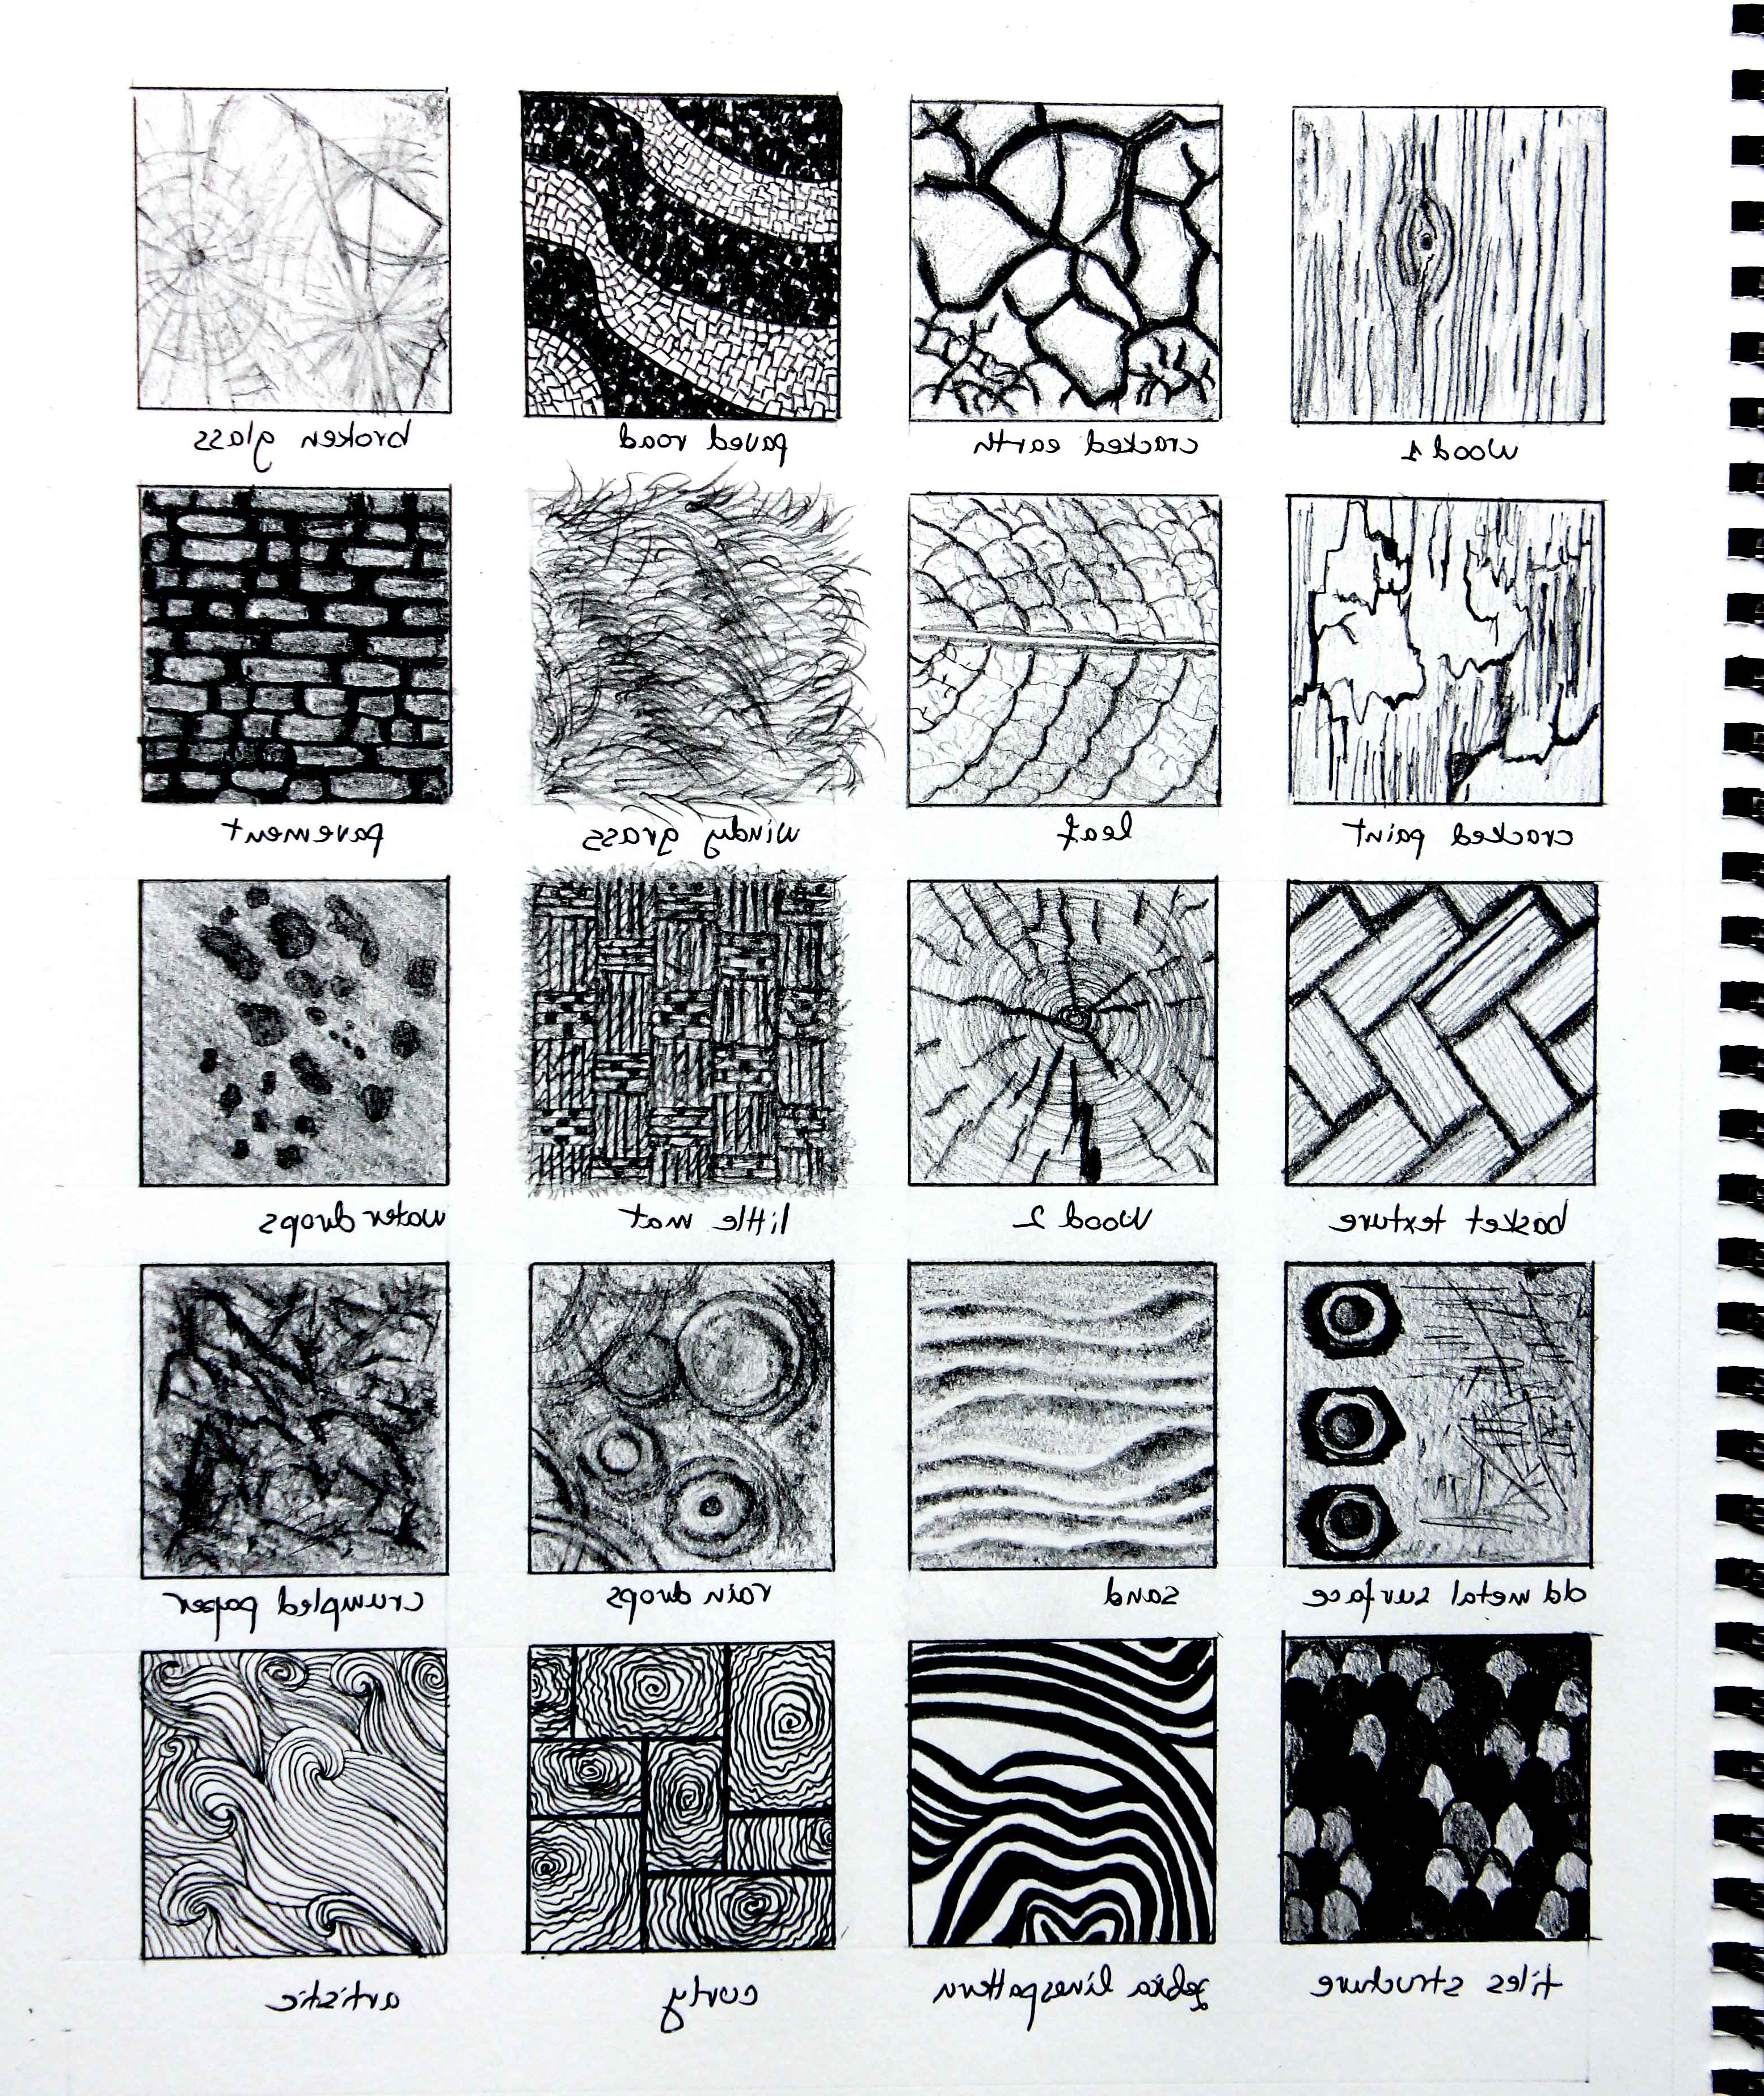 Drawing Textures With Pencil at PaintingValley.com | Explore collection